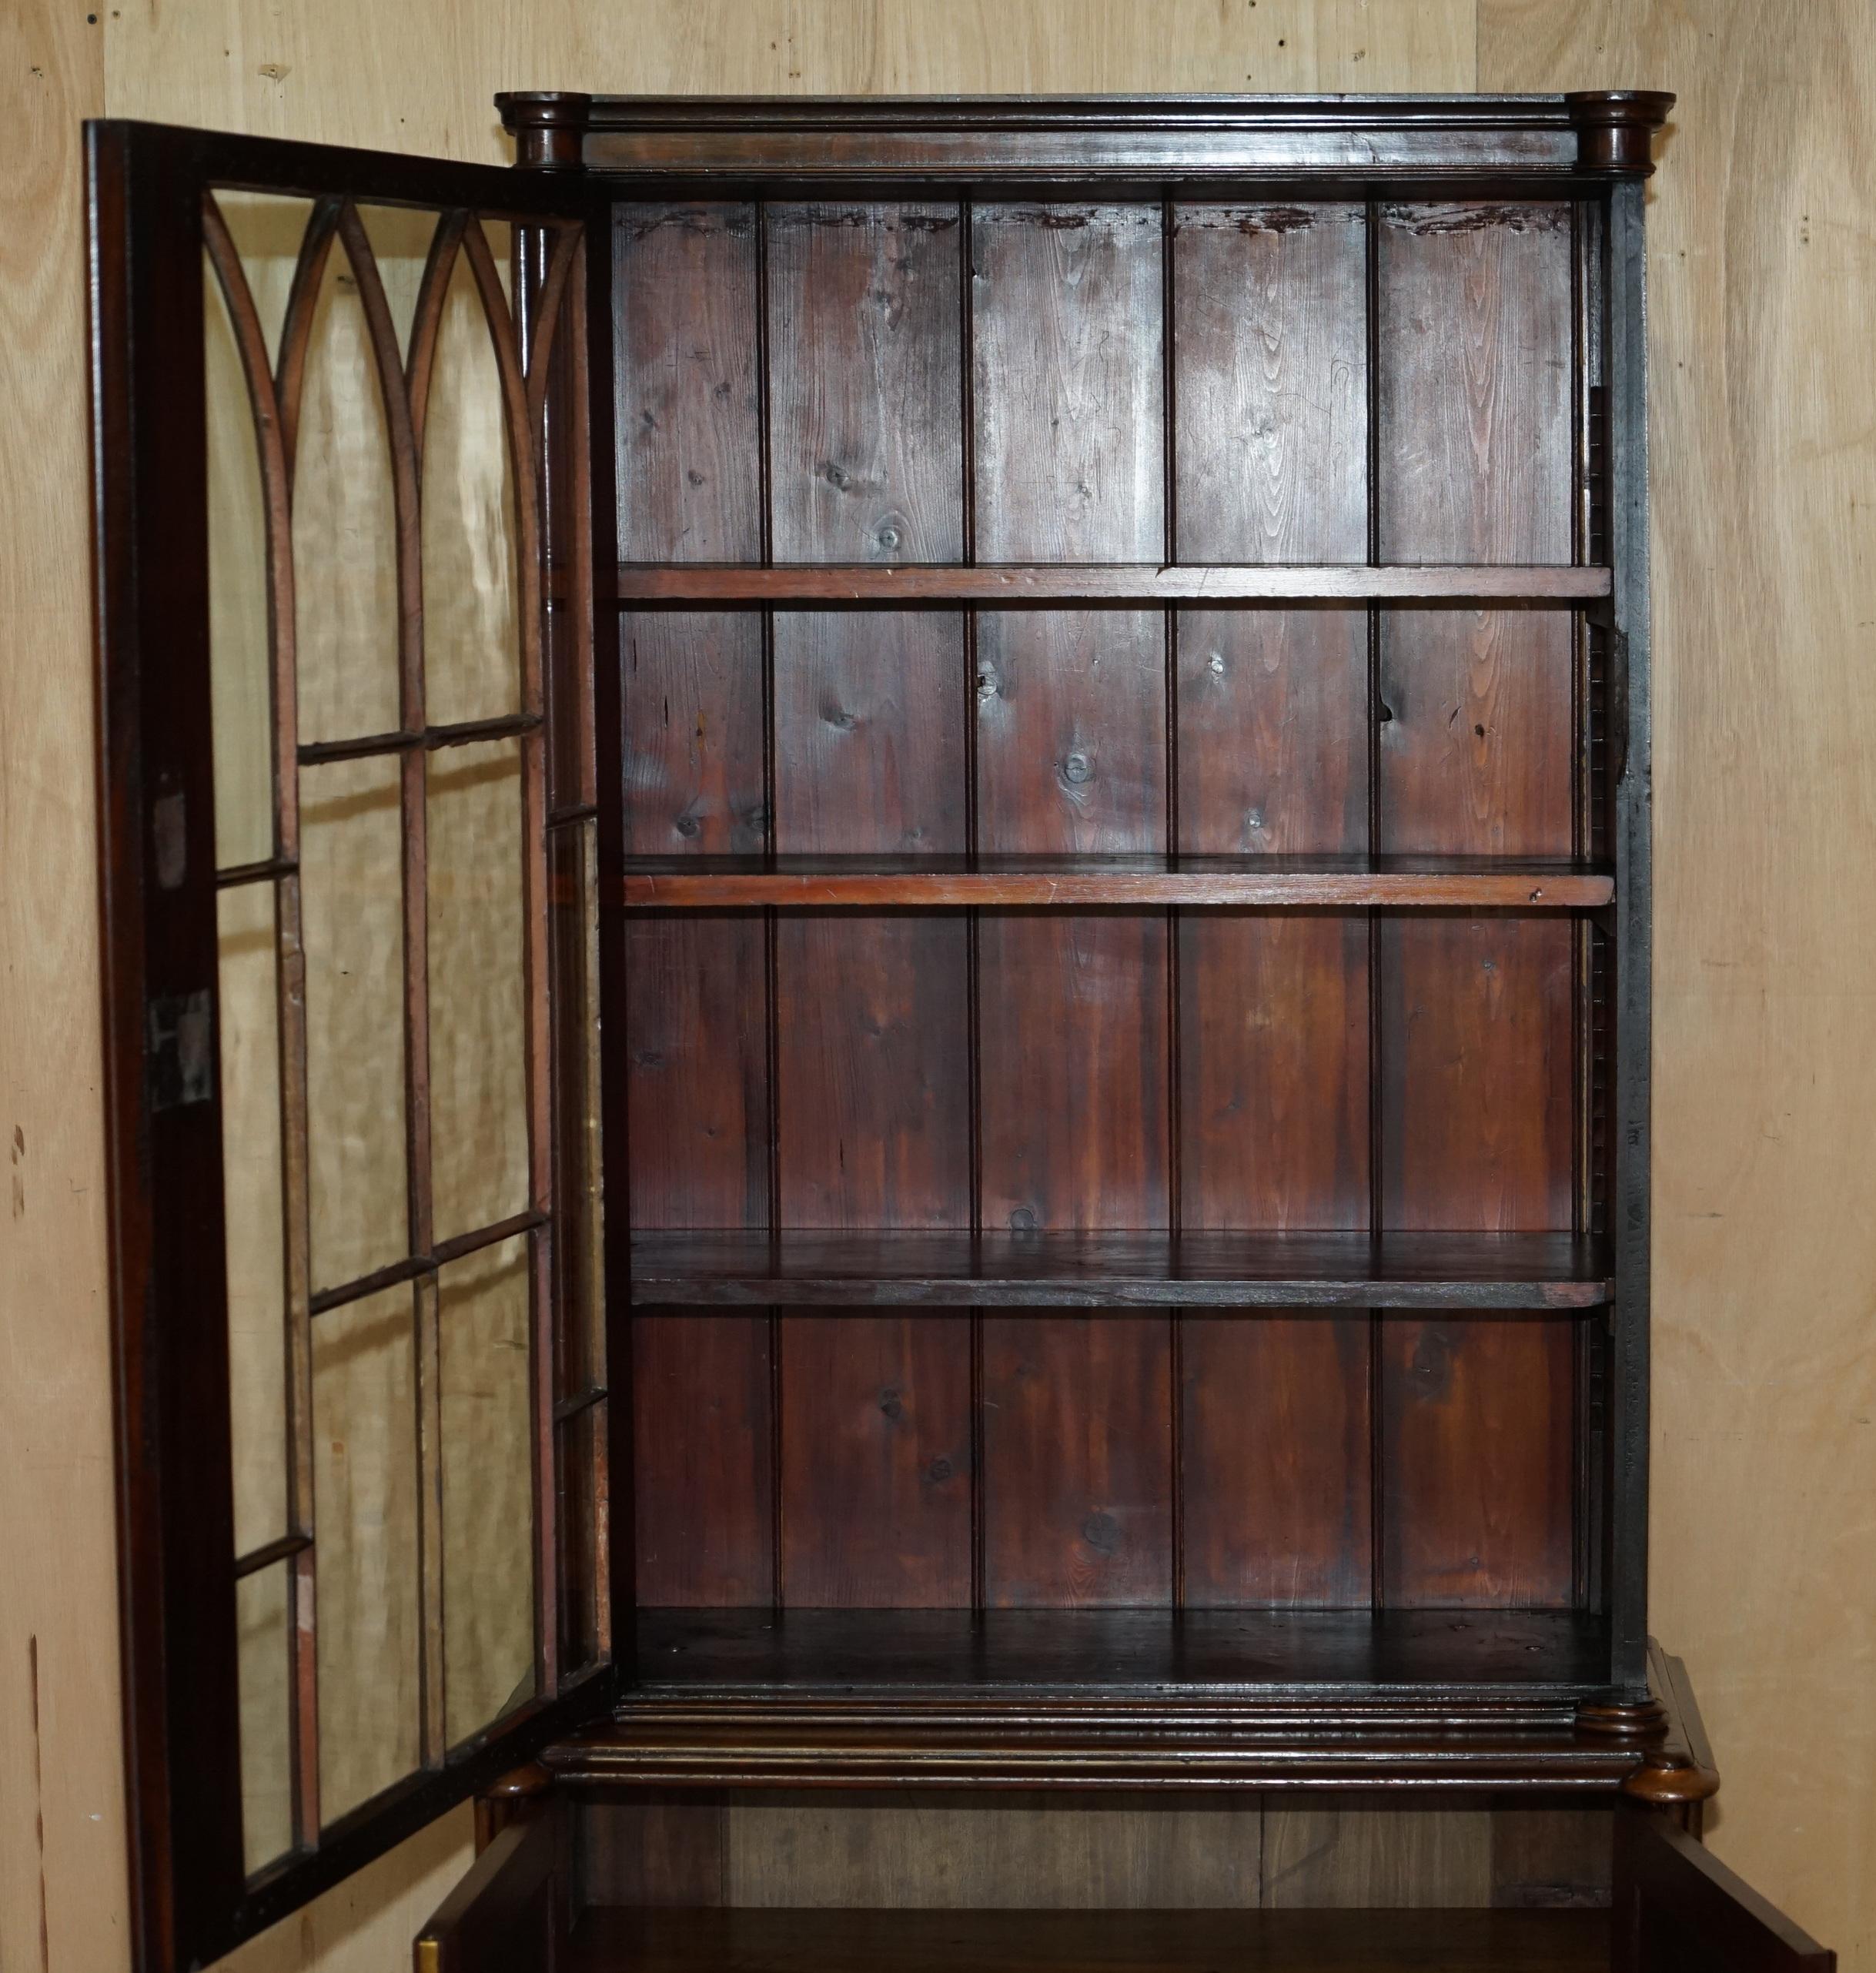 EARLY VICTORIAN GOTHiC REVIVAL ASTRAL GLAZED LIBRARY BOOKCASE WITH STEEPLE GLASS For Sale 7